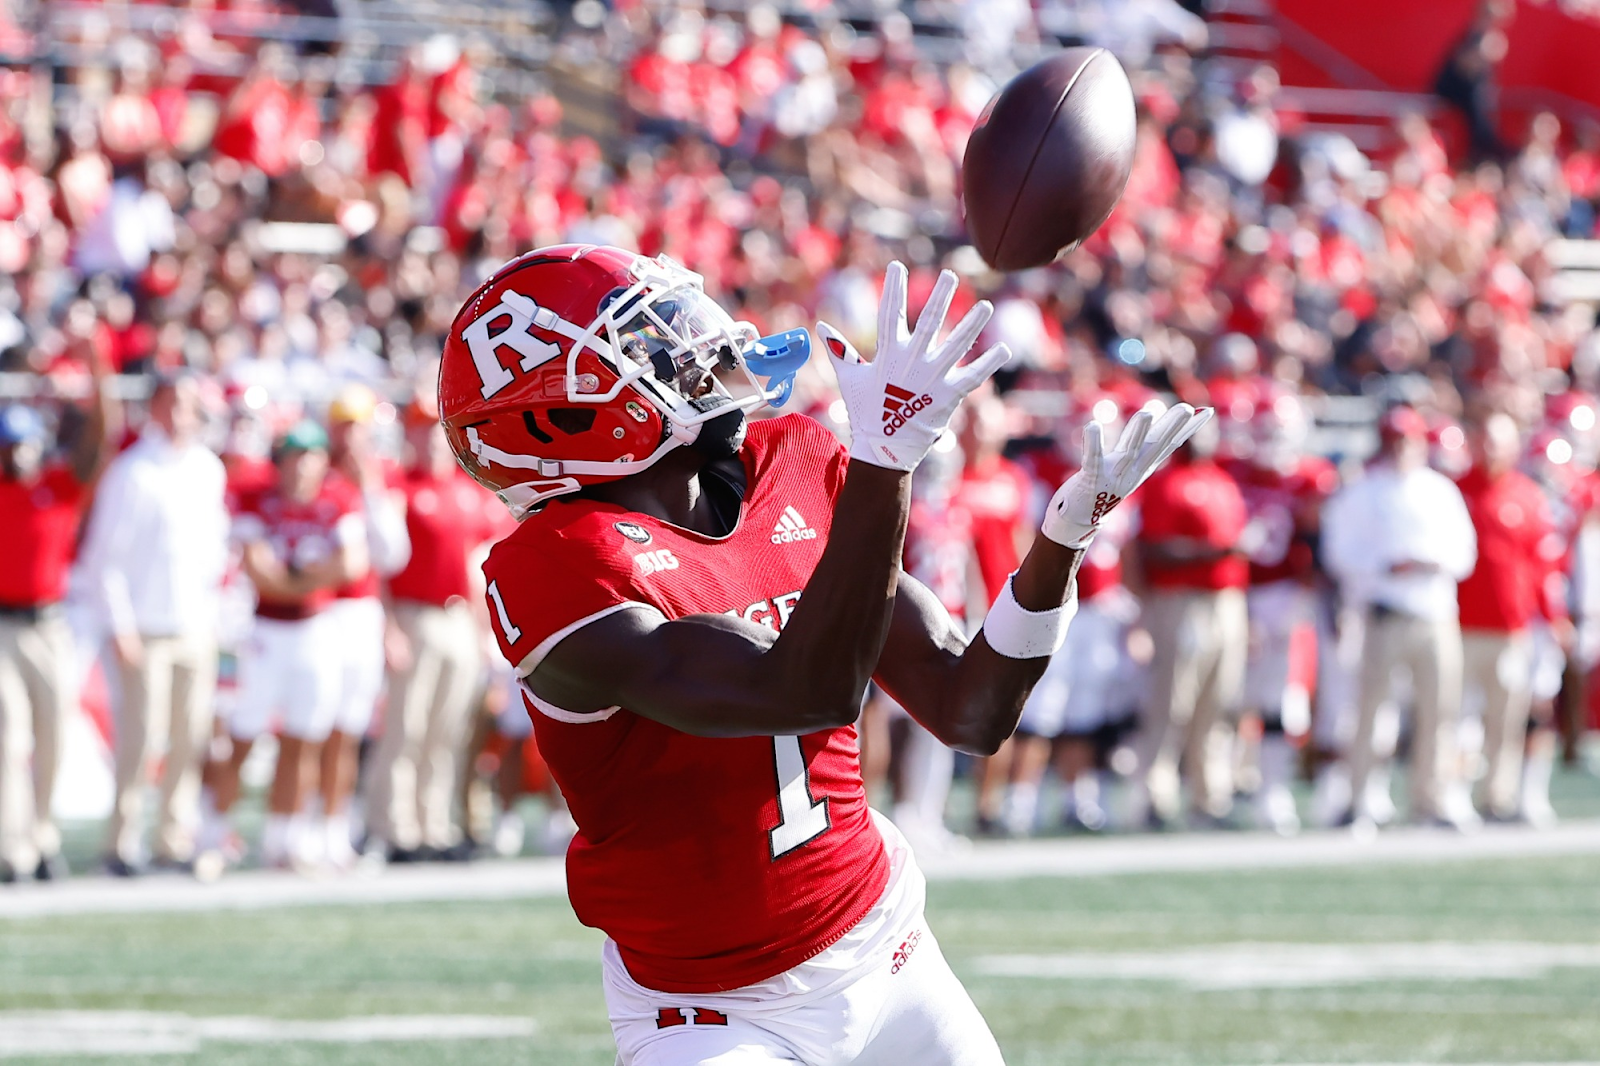 Aron Cruickshank is a dynamic playmaker for Rutgers who is a solid contributor on special teams. Hula Bowl scout Bryan Ault breaks down Cruickshank as an NFL Draft Prospect in his report.